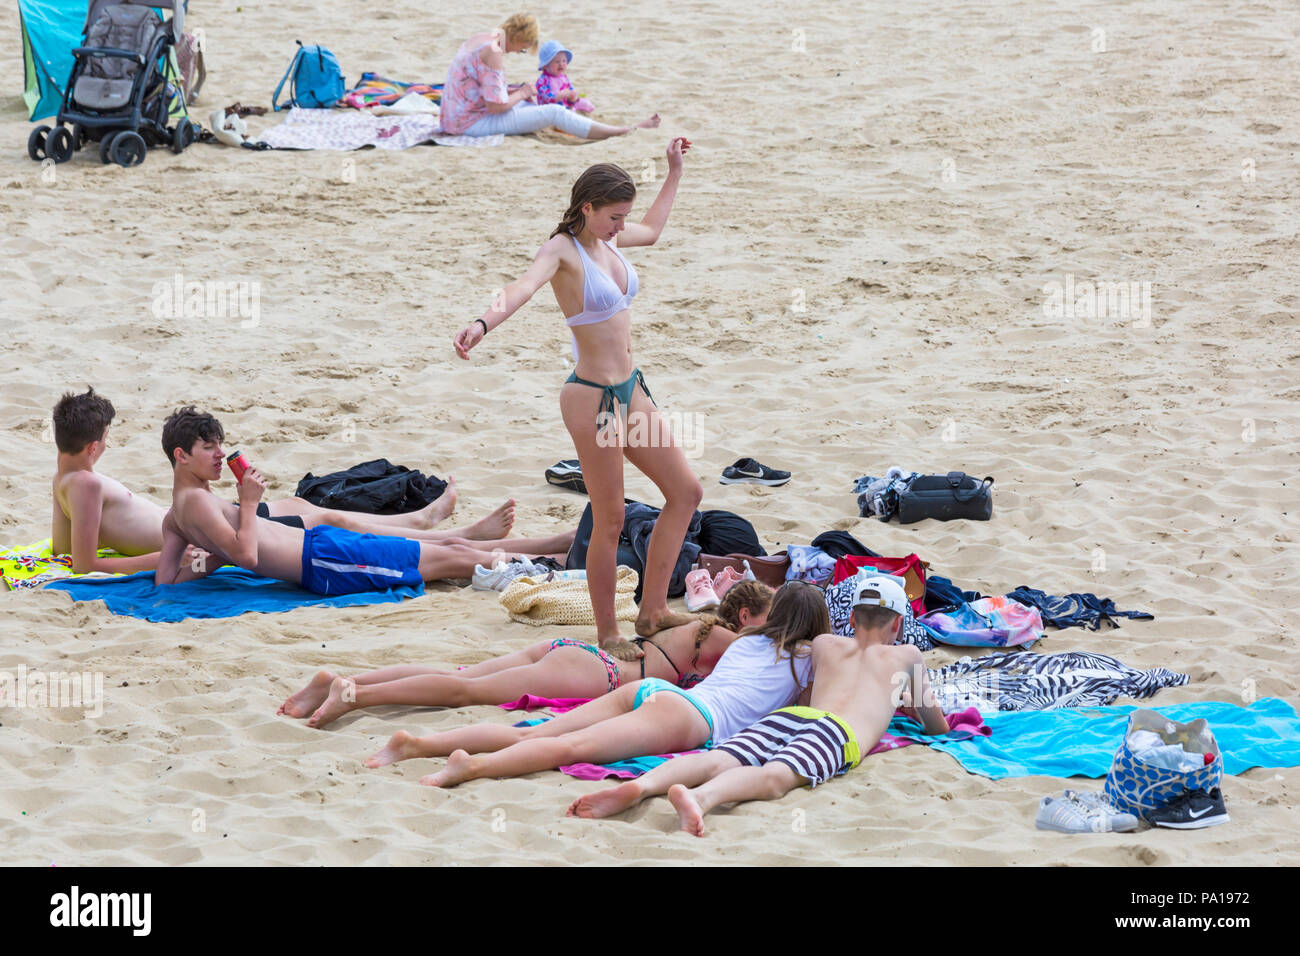 Bournemouth, Dorset, UK. 20th July 2018. UK weather: hot and humid with hazy sunshine at Bournemouth, as sunseekers head to the seaside at Bournemouth beaches to enjoy the fine weather. Group of friends sunbathing and having fun on the beach. Credit: Carolyn Jenkins/Alamy Live News Stock Photo